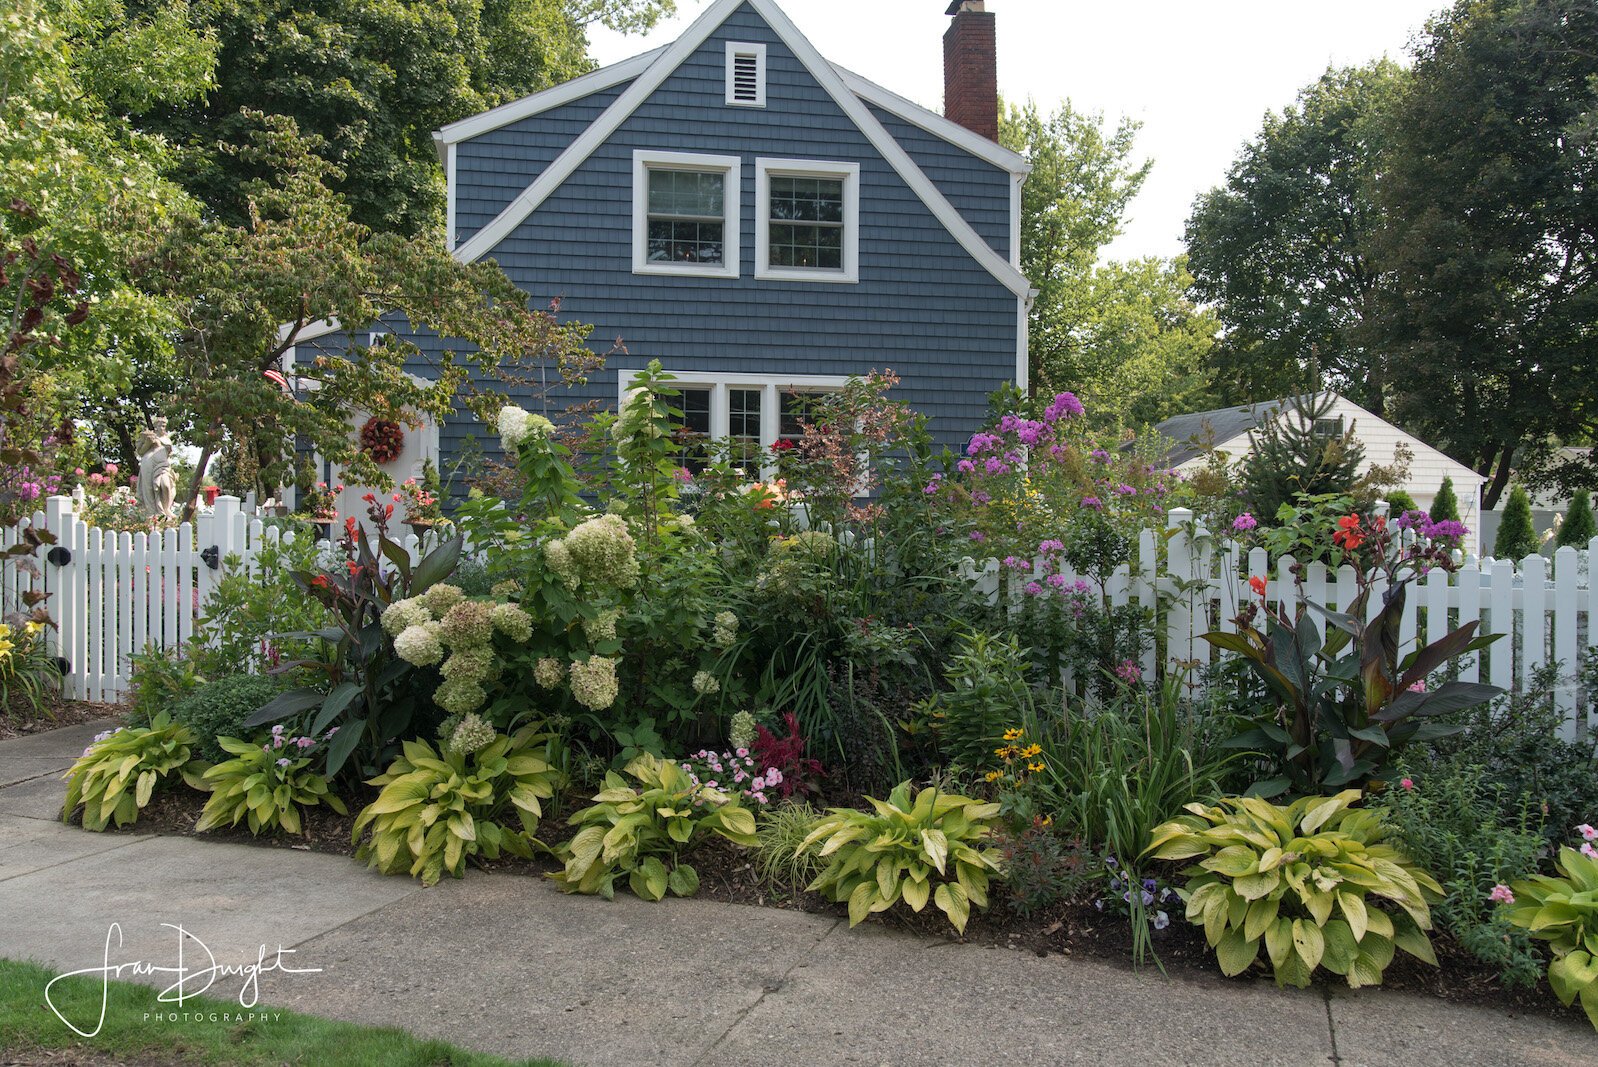 Gardens with a Victorian-style adorn the home of Scott Stokes and Curtis Whitaker in Milwood.